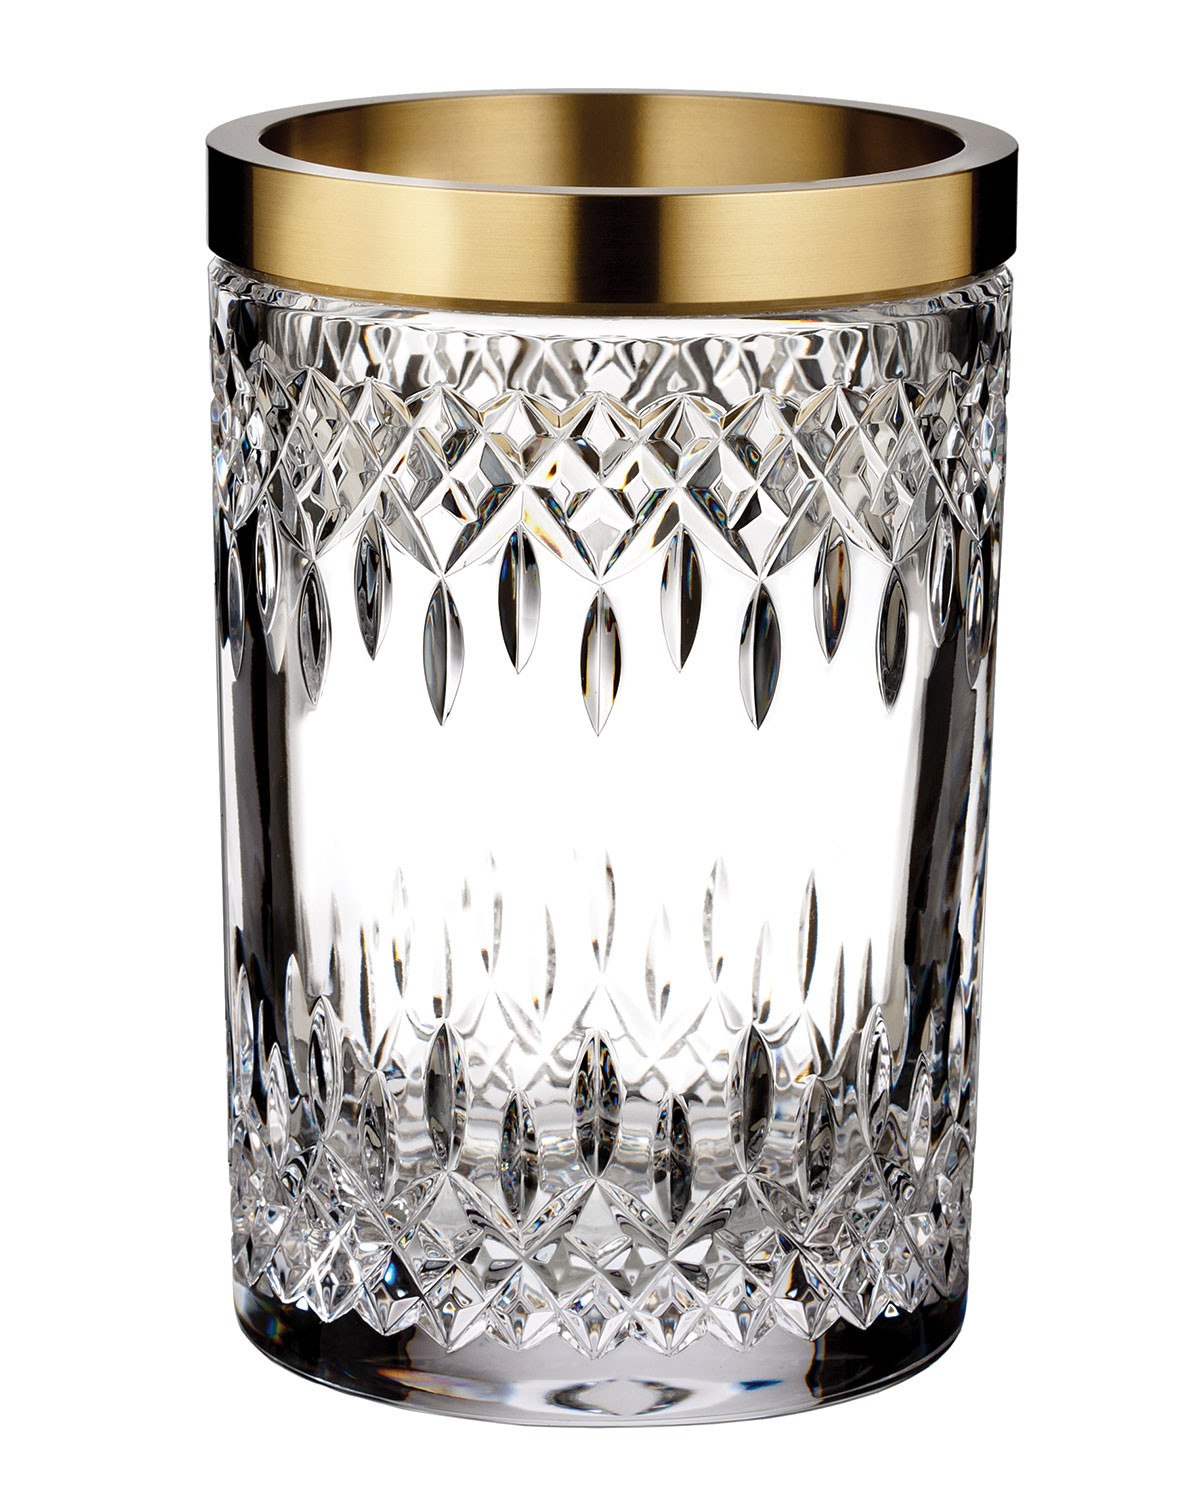 10 Fabulous Waterford Lismore Vase 8 2024 free download waterford lismore vase 8 of waterford crystal lismore reflections gold band vase 8 neiman marcus throughout lismore reflections gold band vase 8